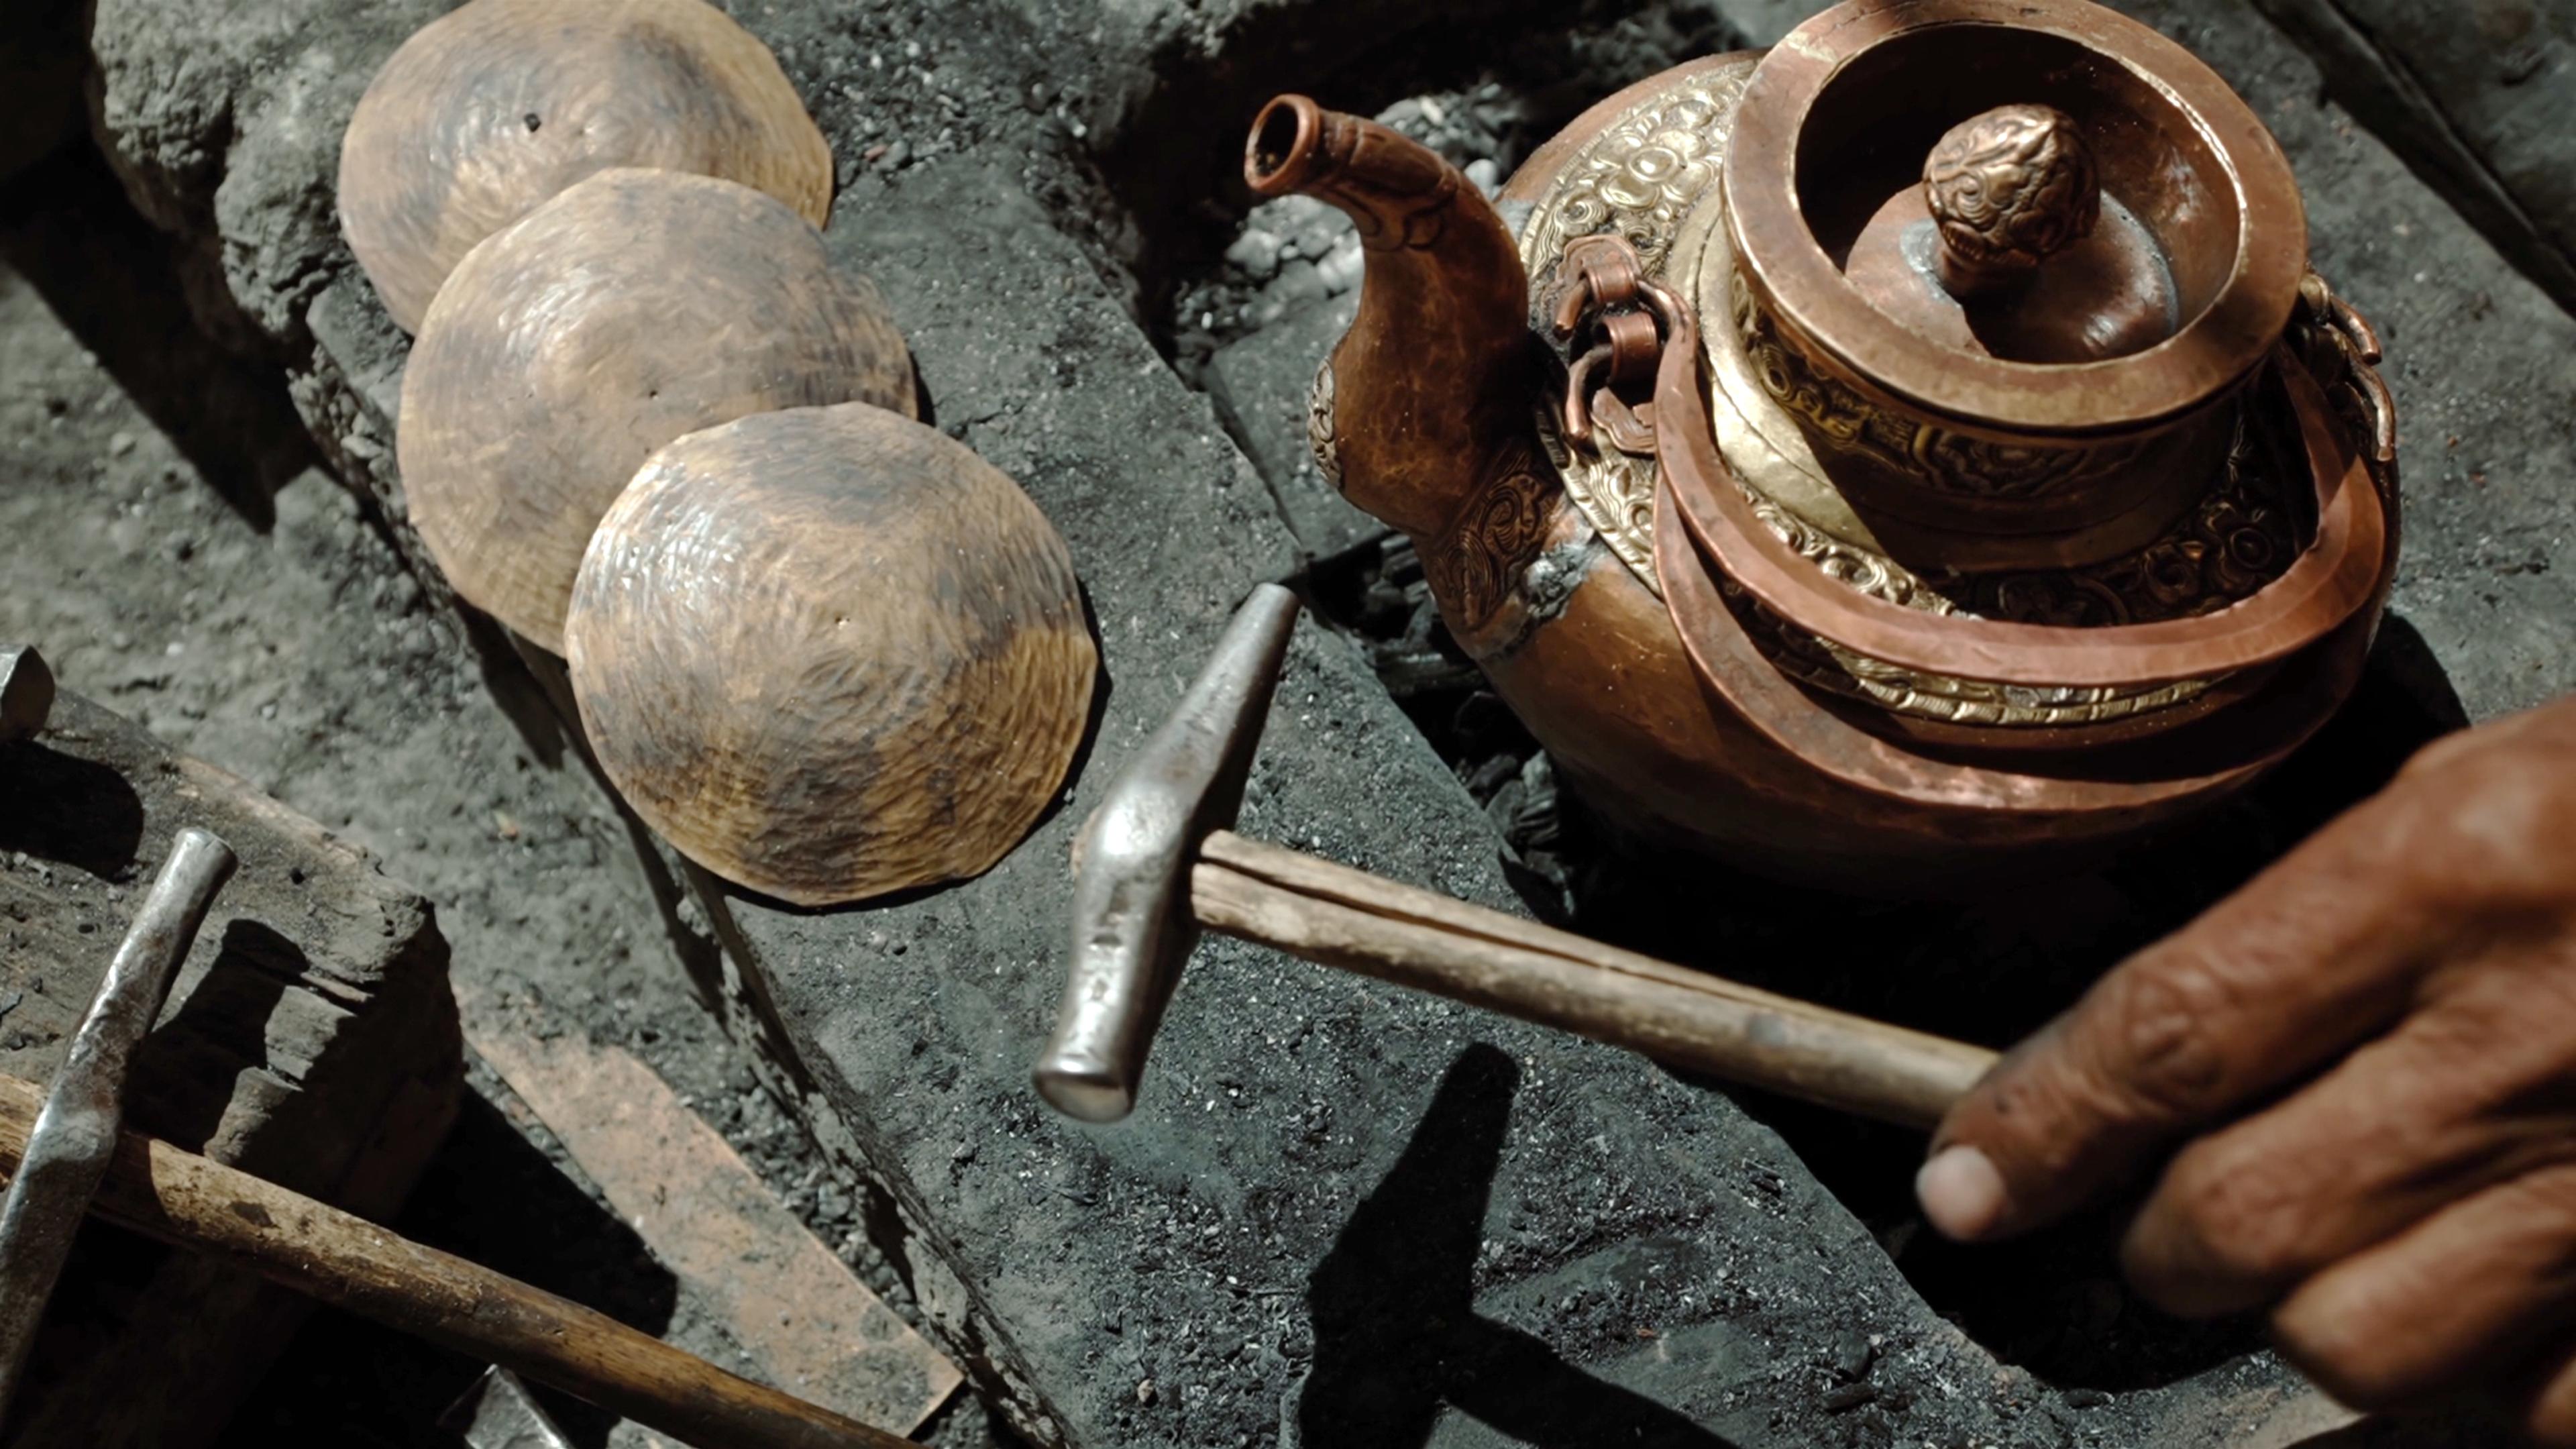 Close-up of a hammer, metal pot, and three copper spheres on a stone surface, with a hand holding the hammer.